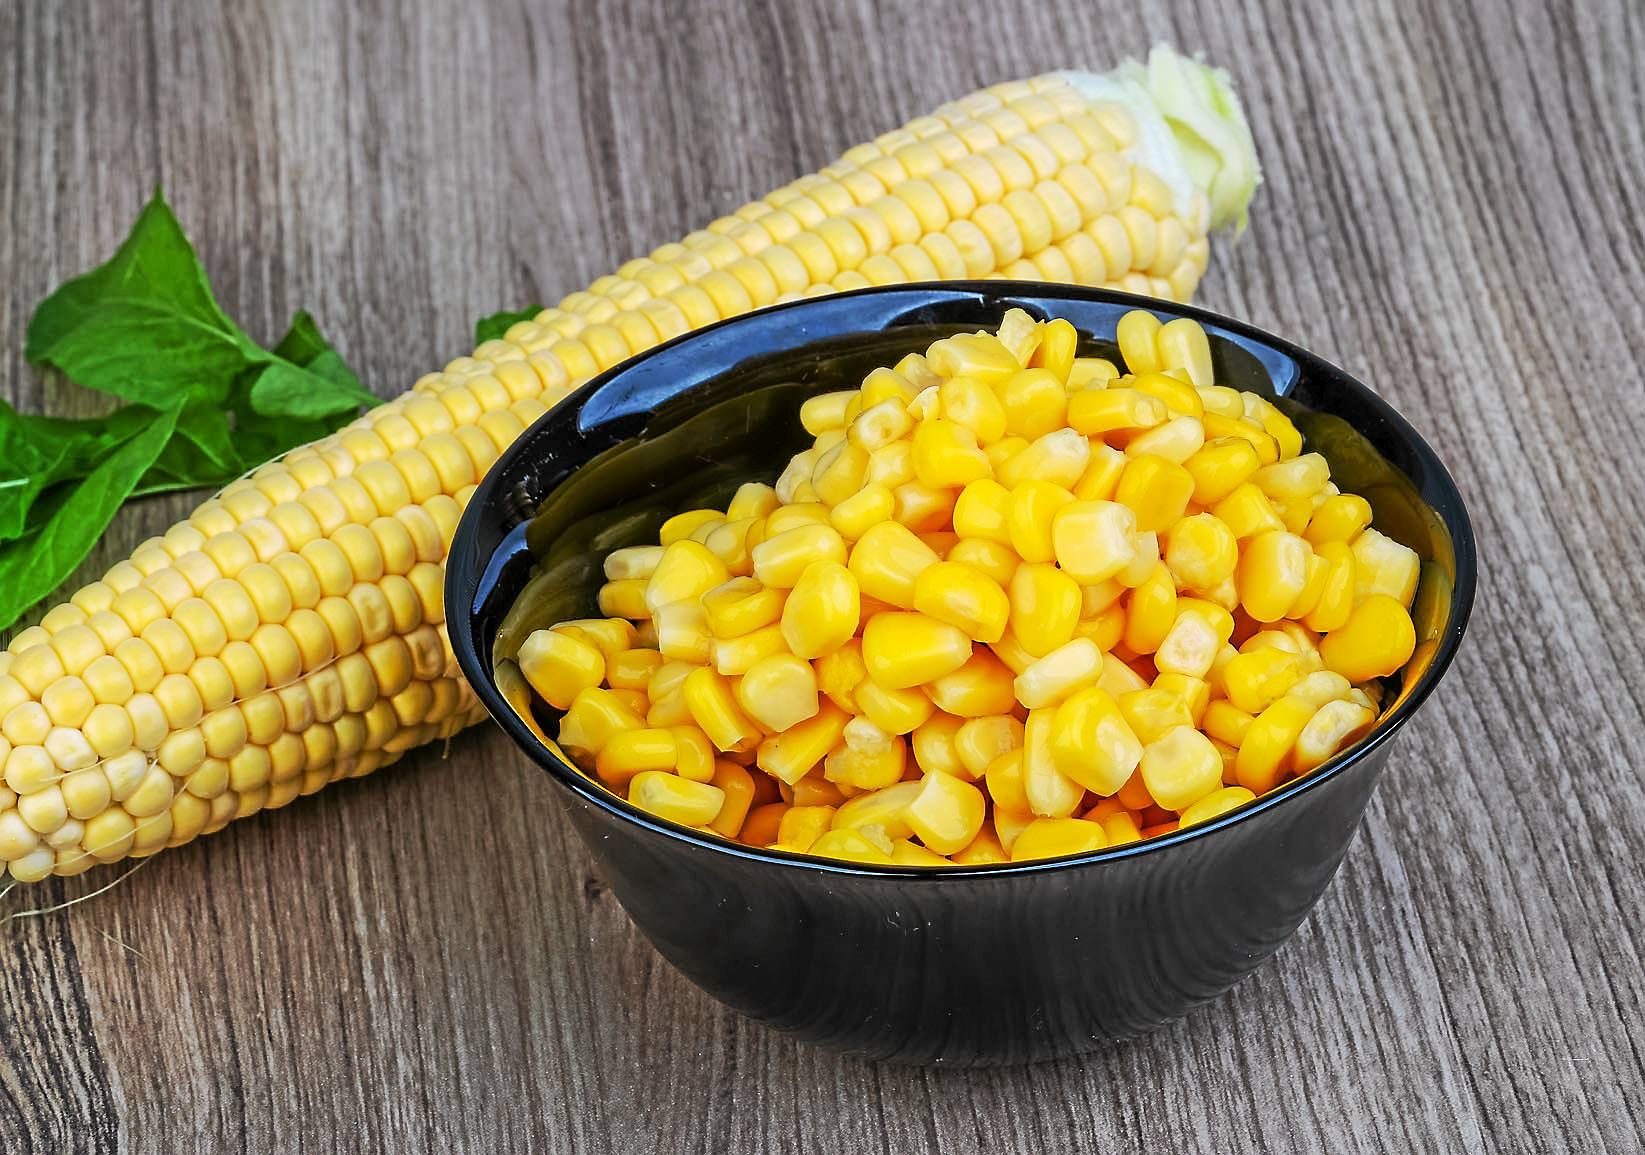 Corn facts and folklore will have us grinning from ear to ear.